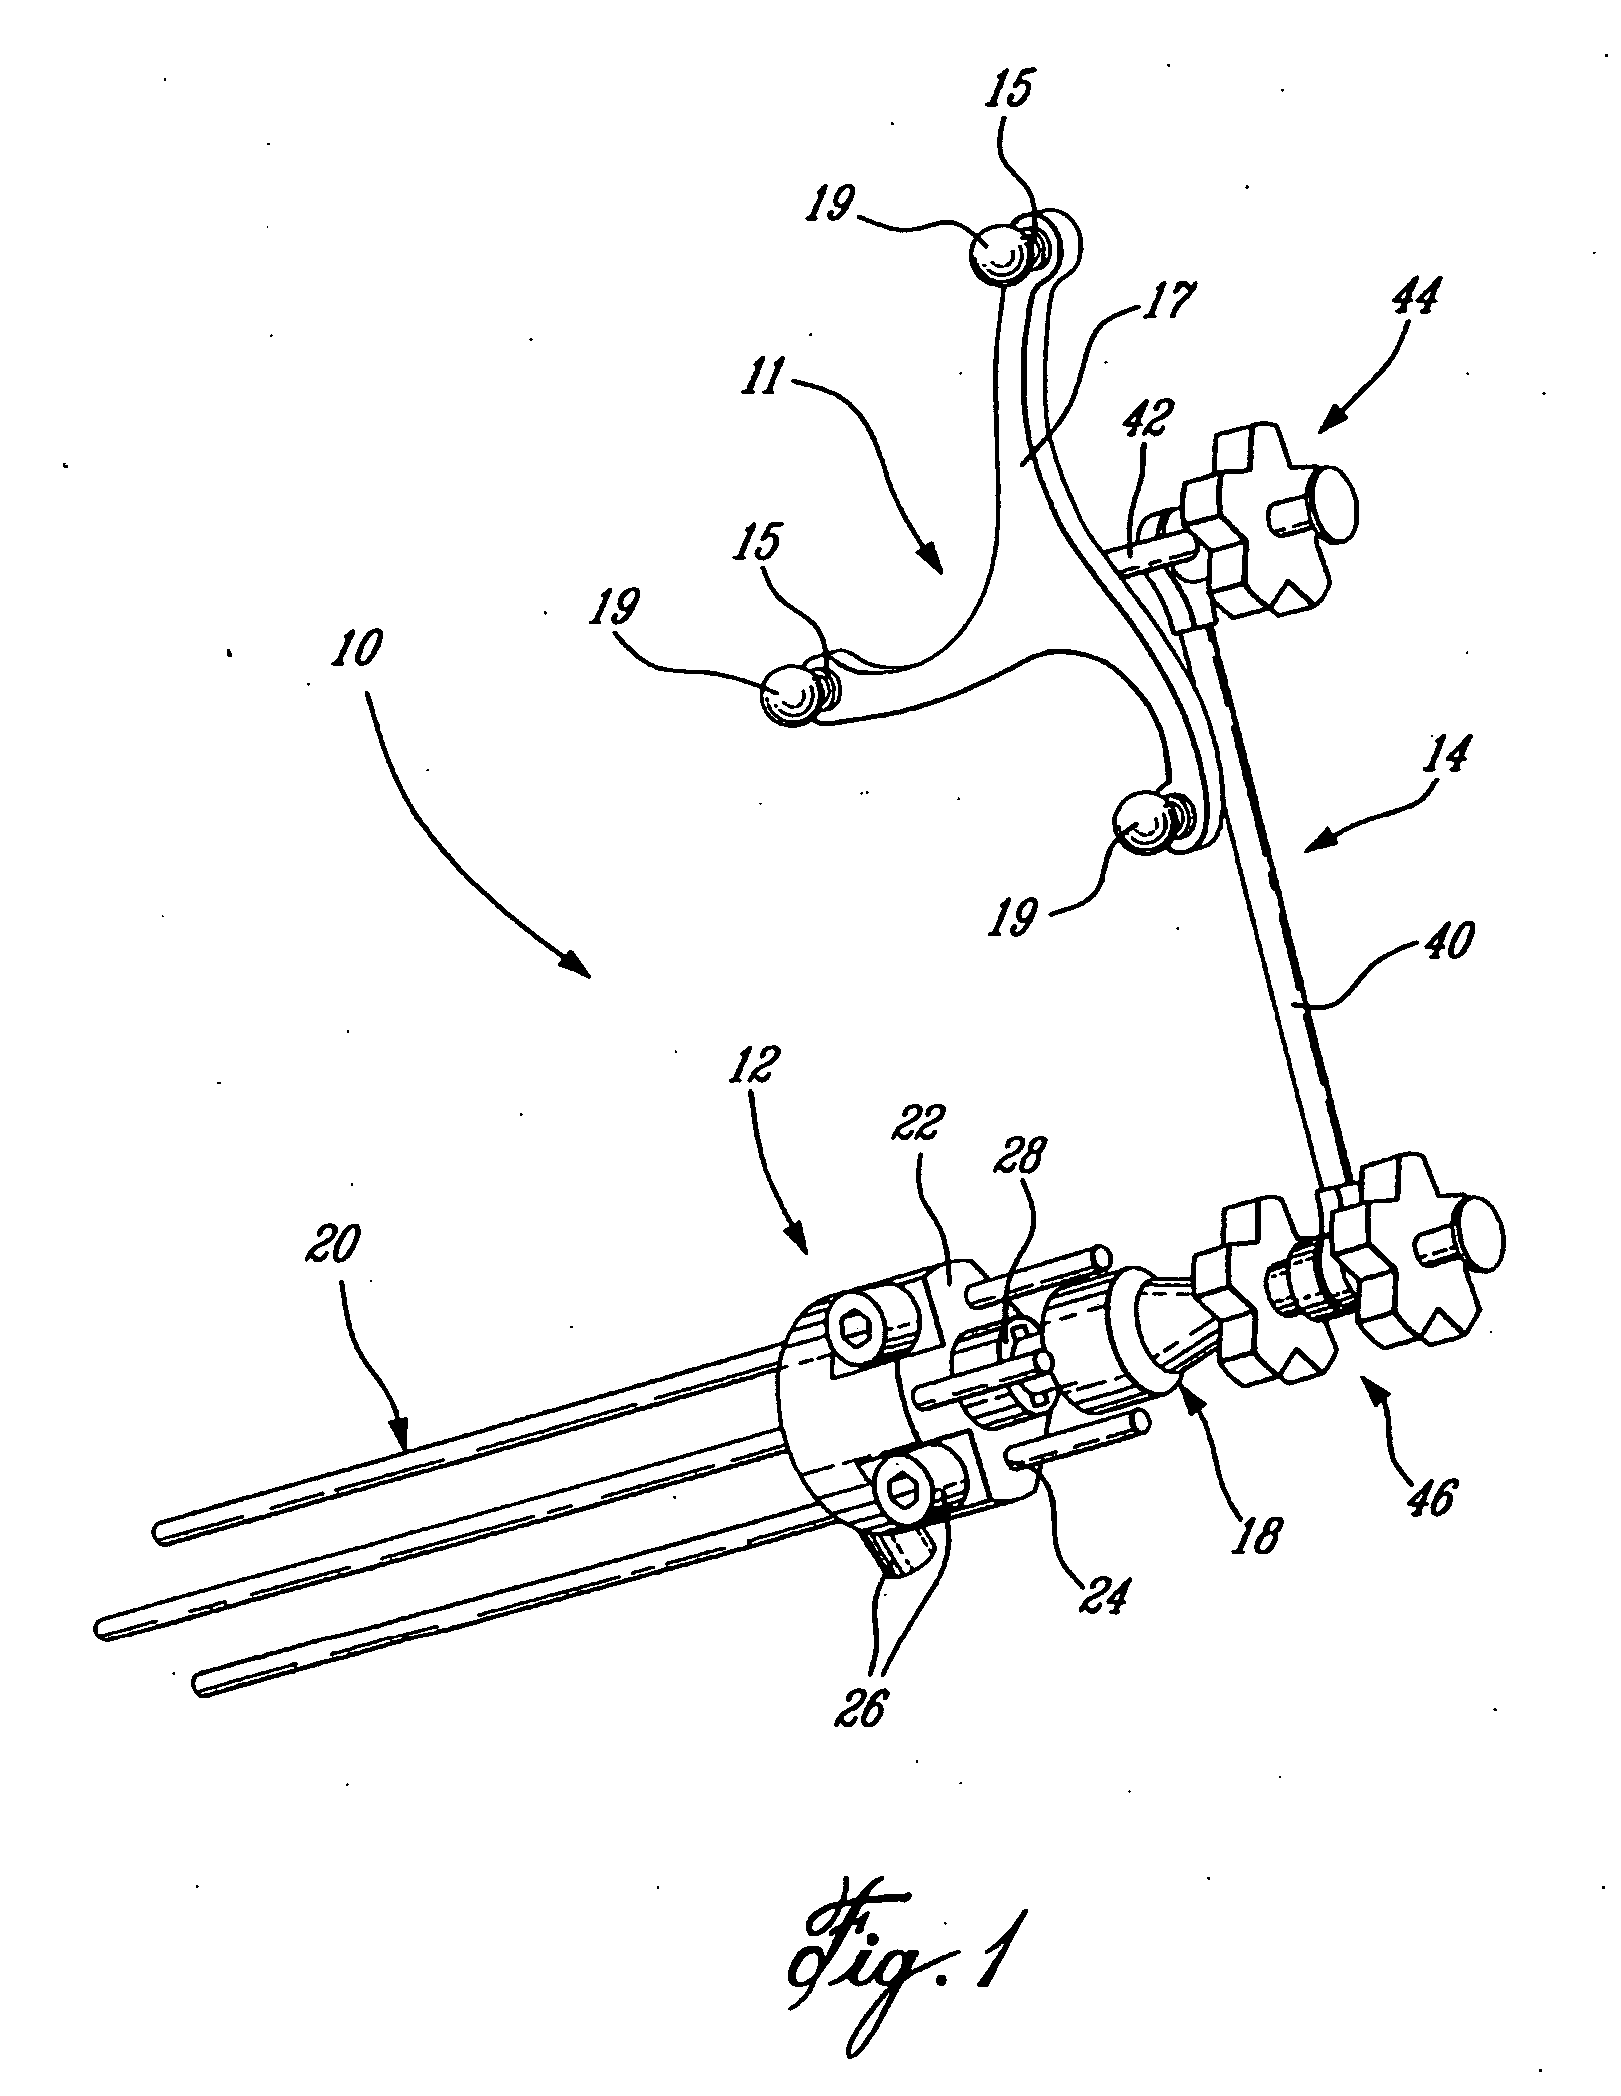 CAS modular body reference and limb position measurement system